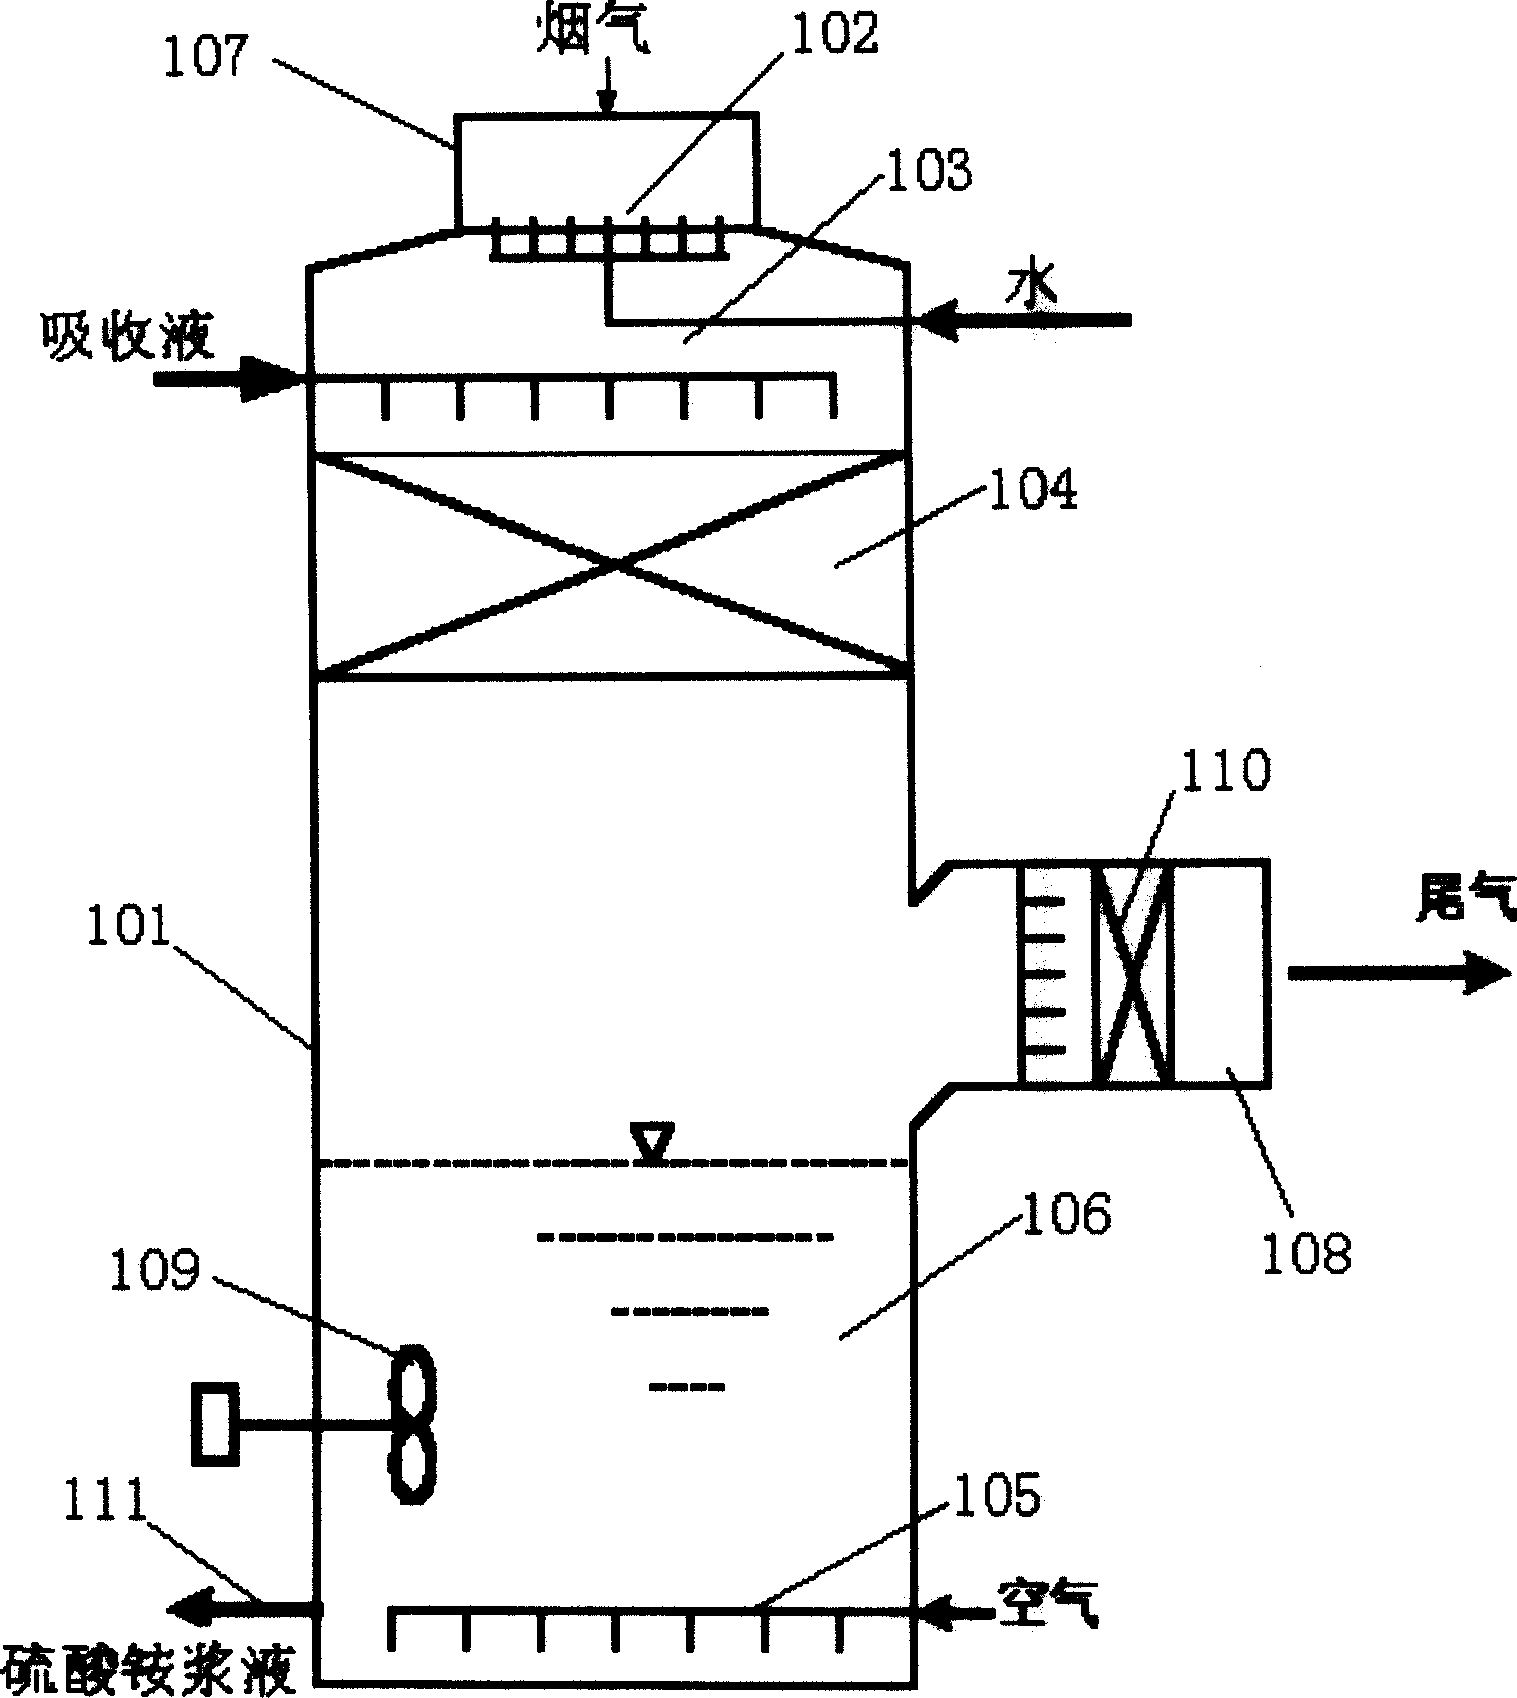 Method and device for producing thiamine from surface dioxide in recovered waste gas